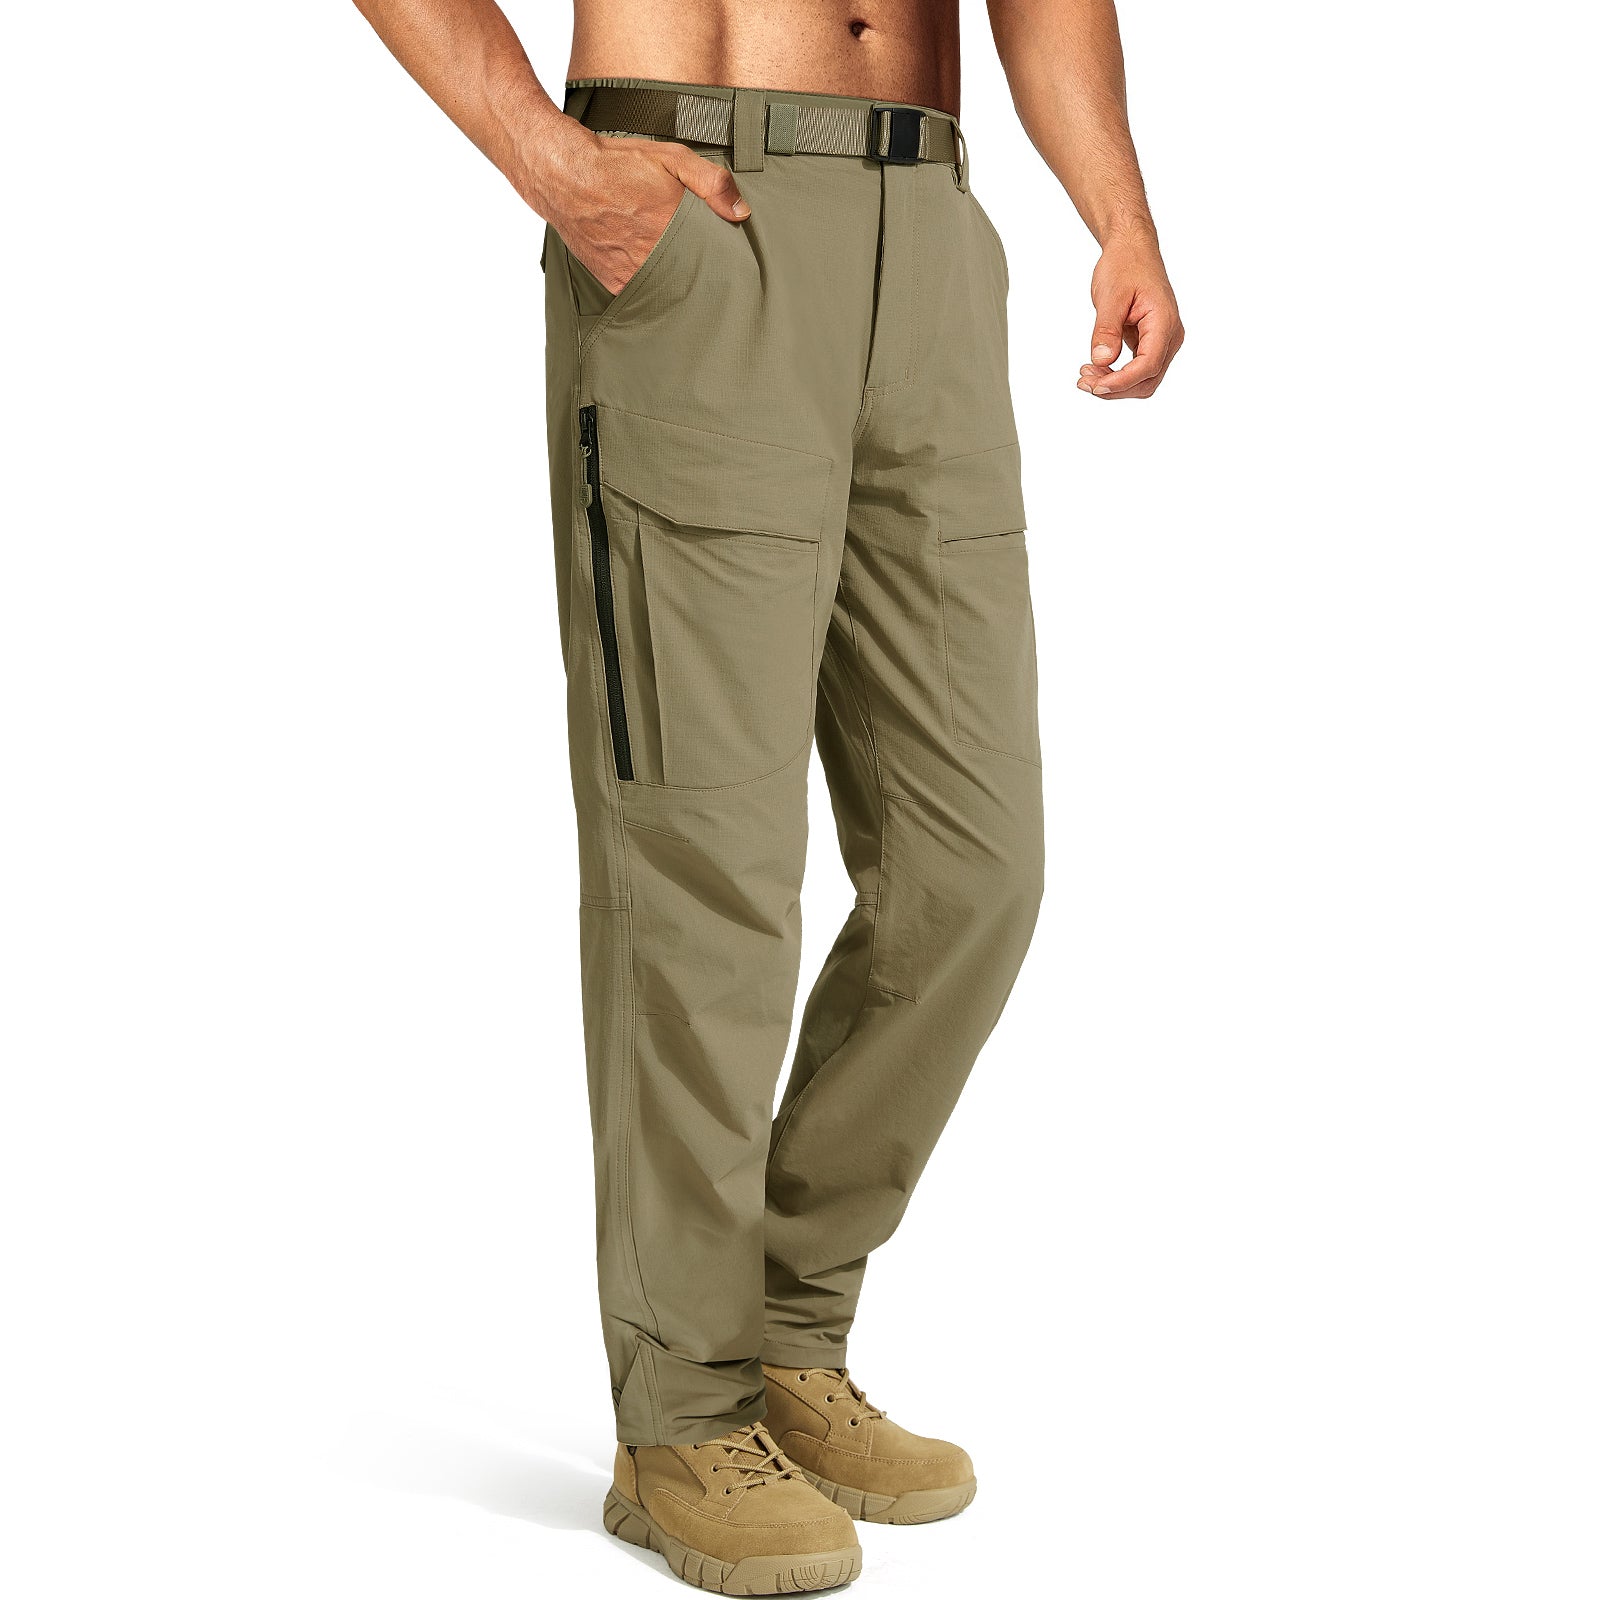 FREE SOLDIER Men's Water Resistant Pants Relaxed Fit Tactical Cargo Work  Pants with Multi Pocket